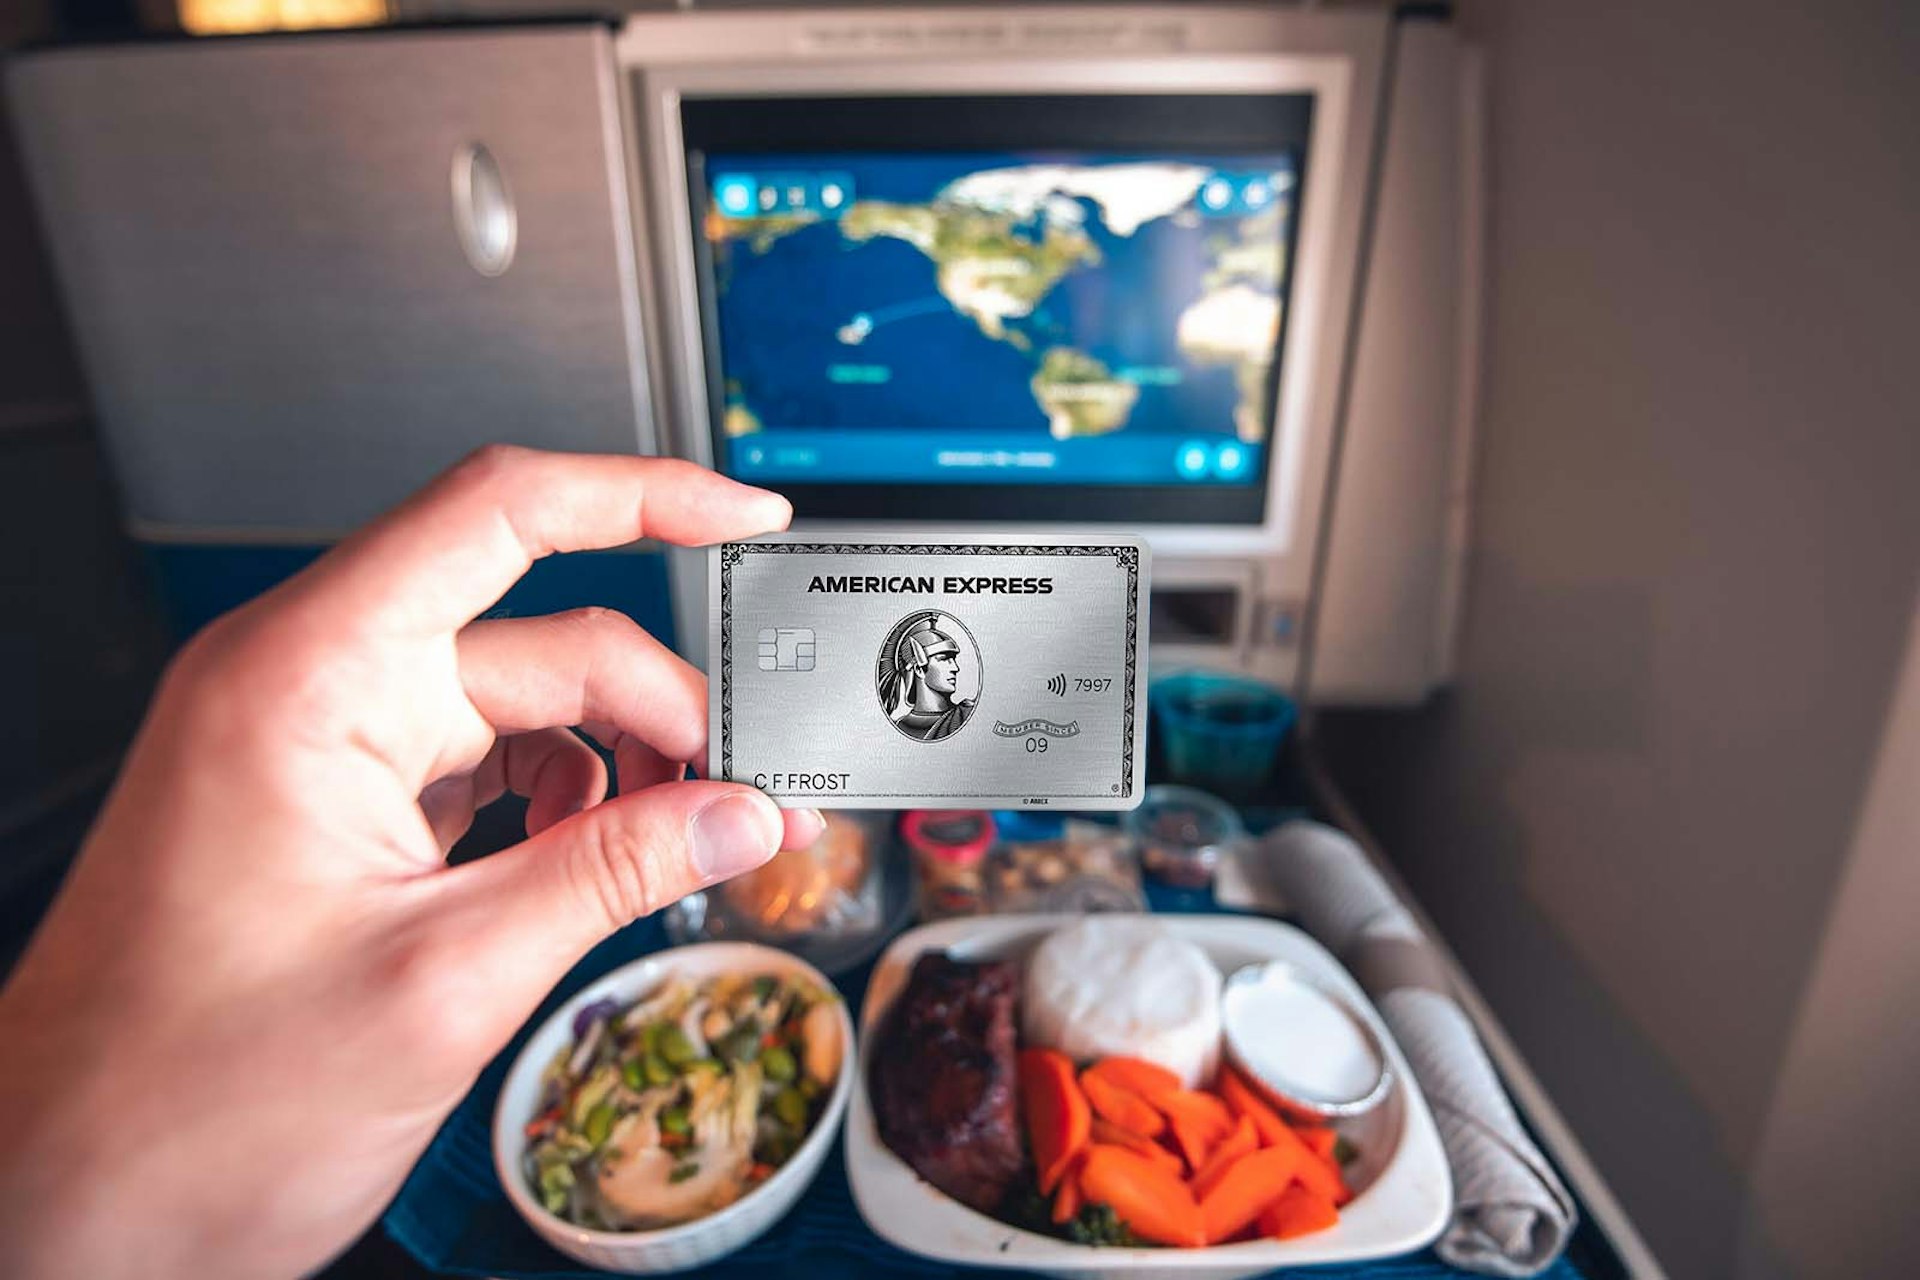 The Amex Platinum card in business class